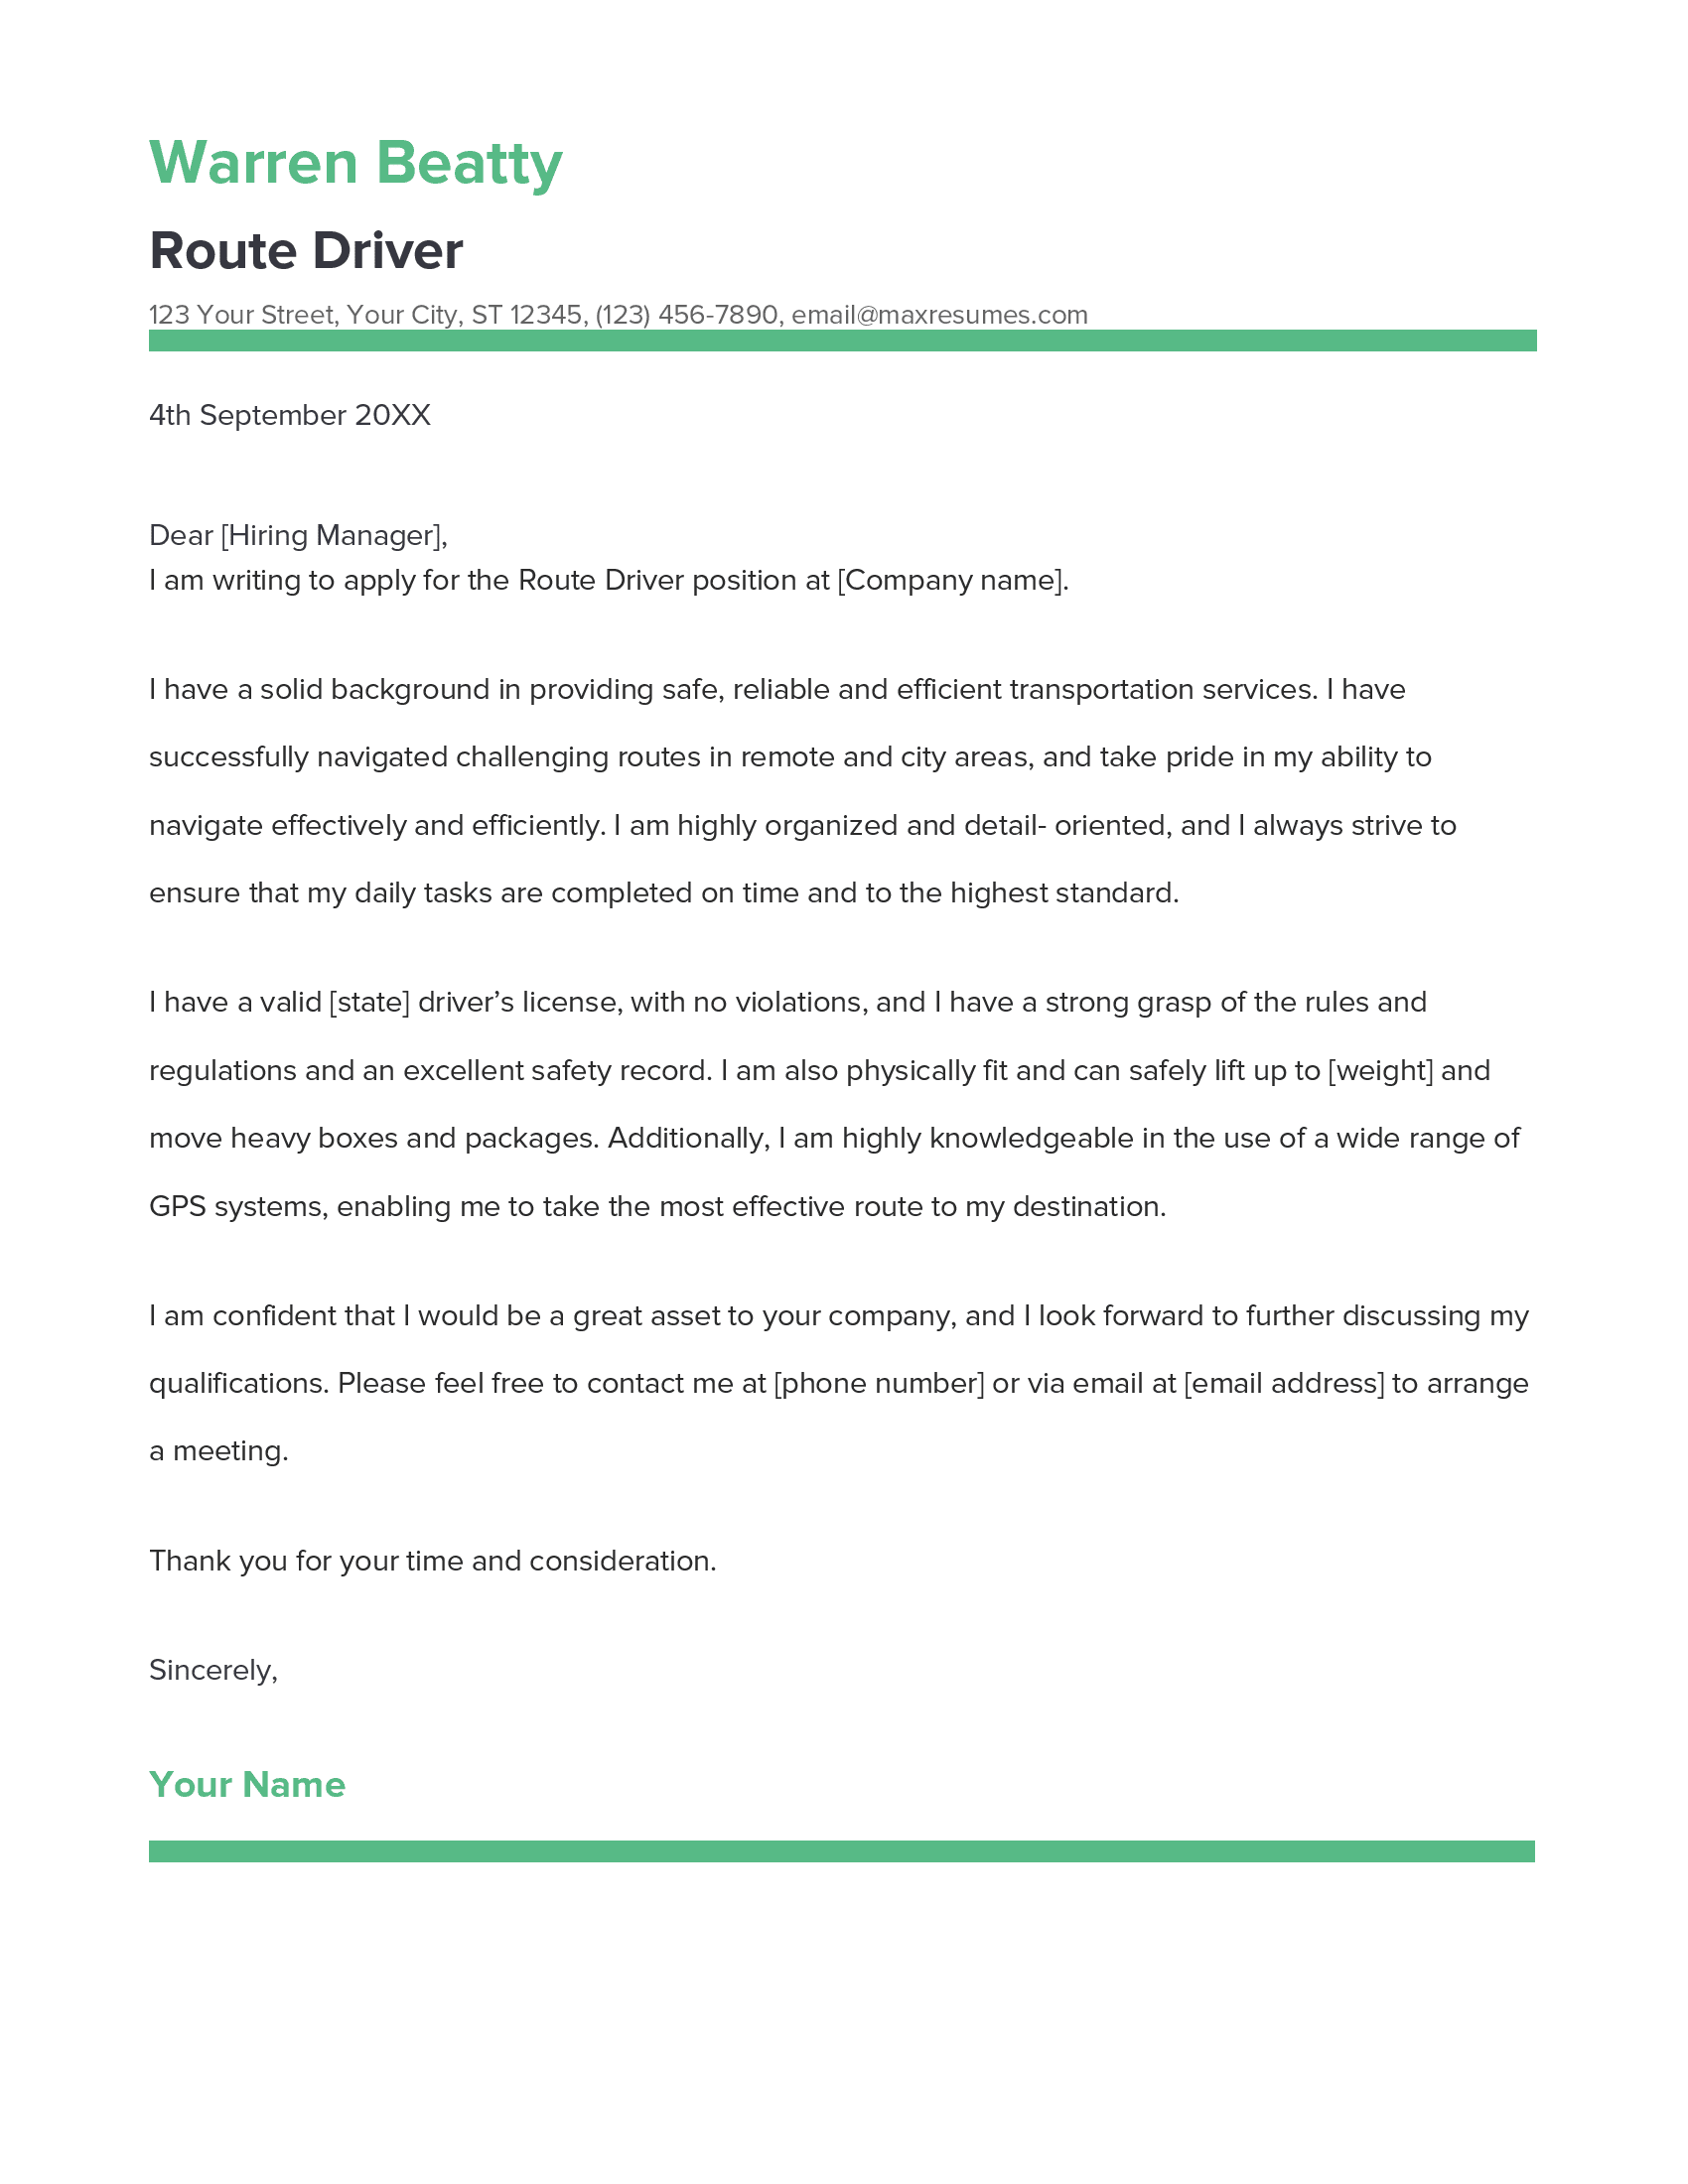 Route Driver Cover Letter Example